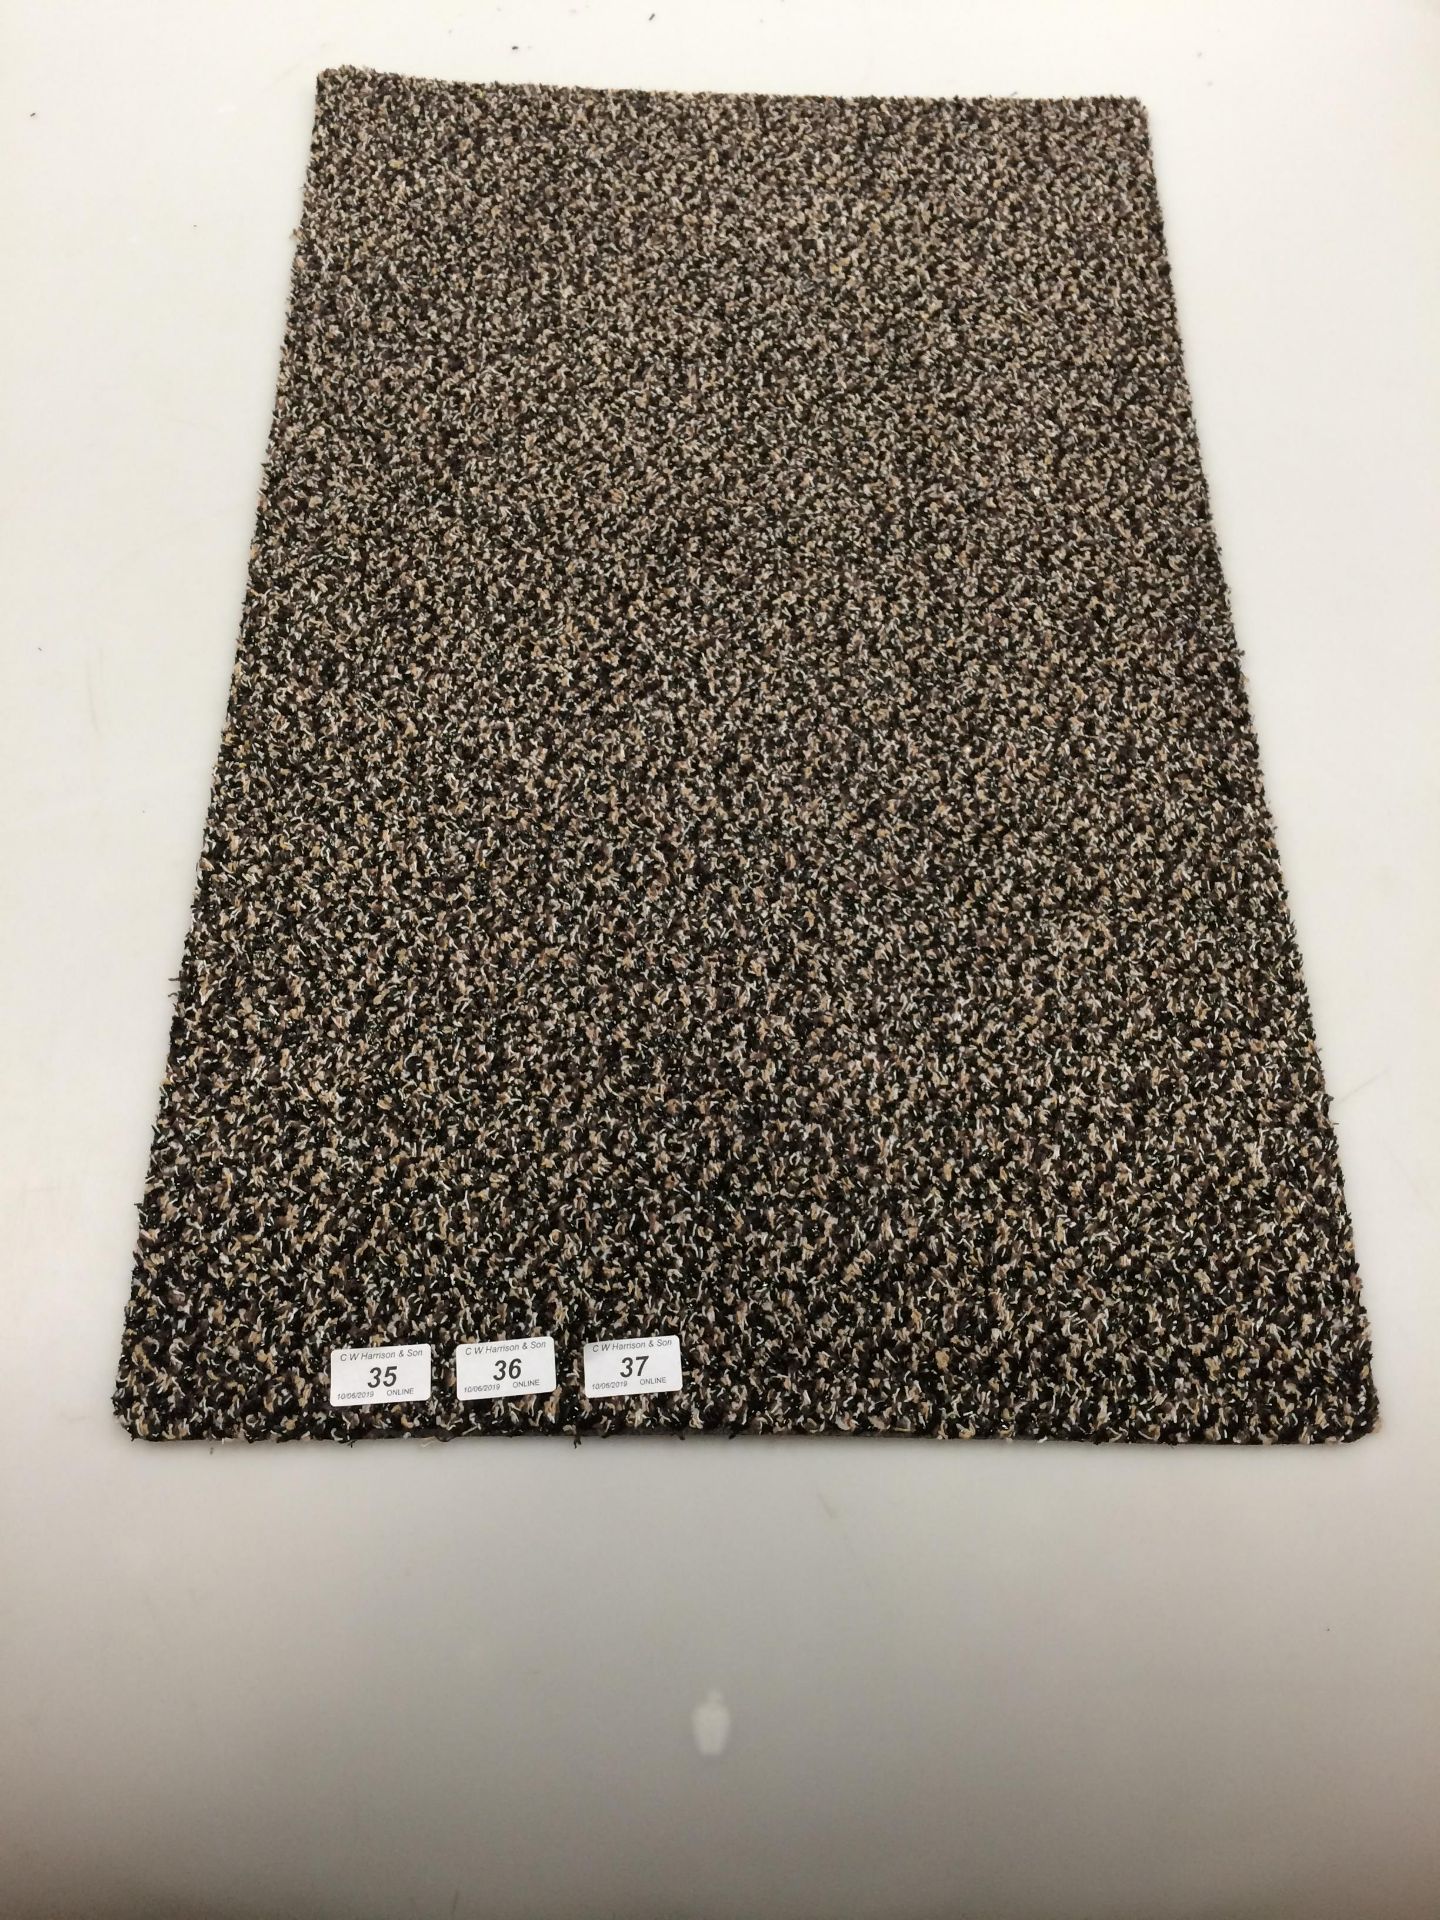 10 x brown patterned door mats with anti-slip rubber each 50 x 80cm